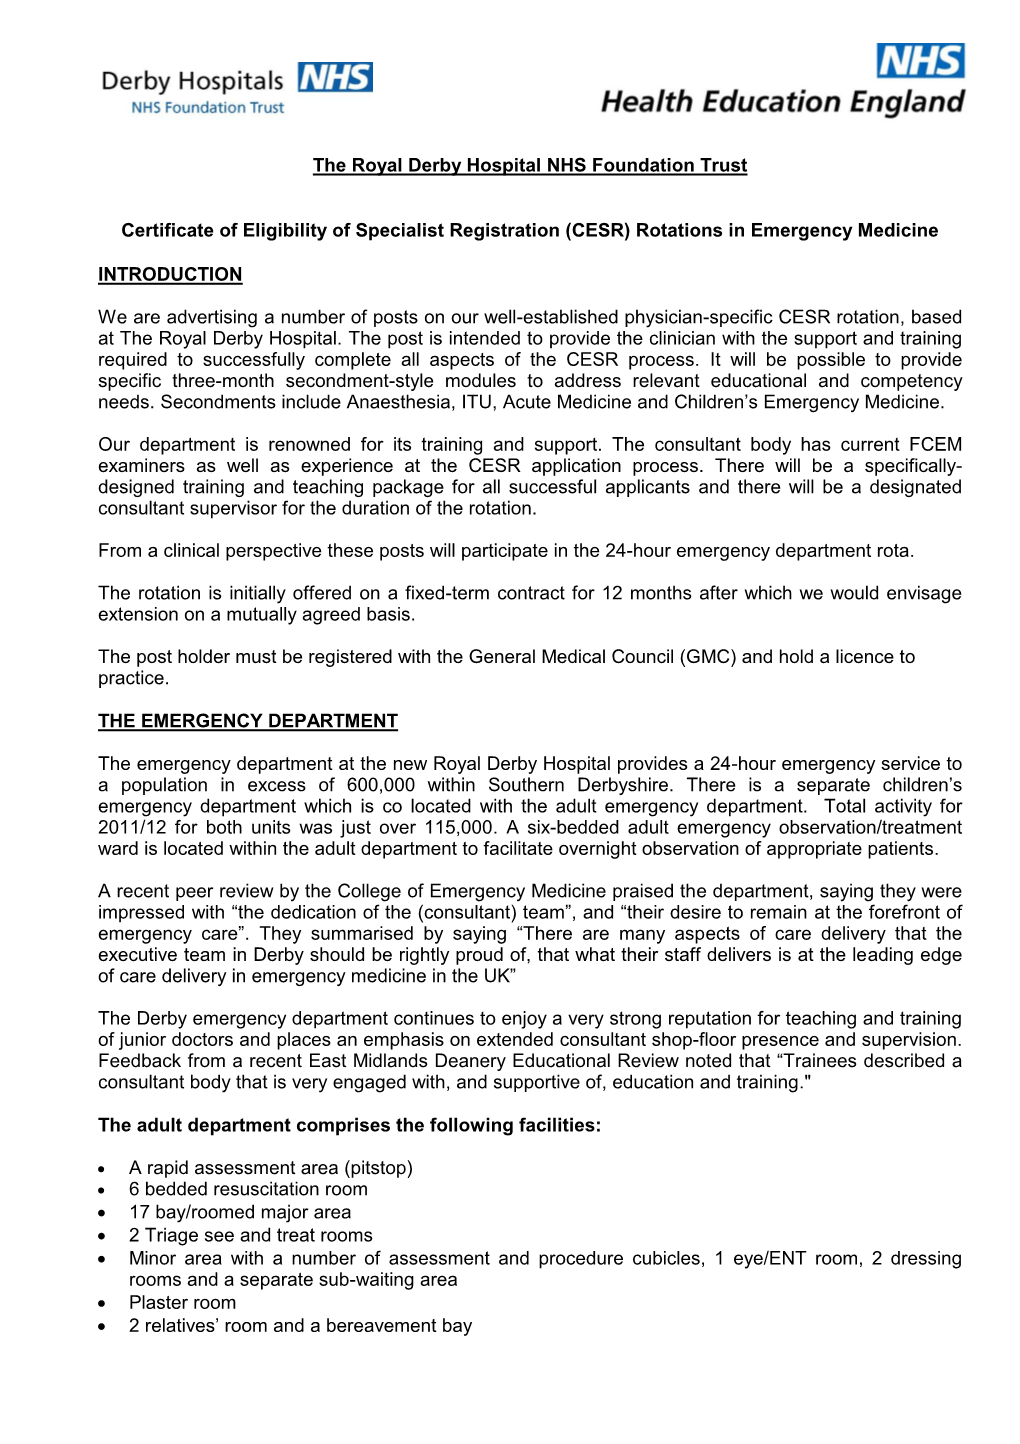 The Royal Derby Hospital NHS Foundation Trust Certificate of Eligibility of Specialist Registration (CESR) Rotations in Emergenc